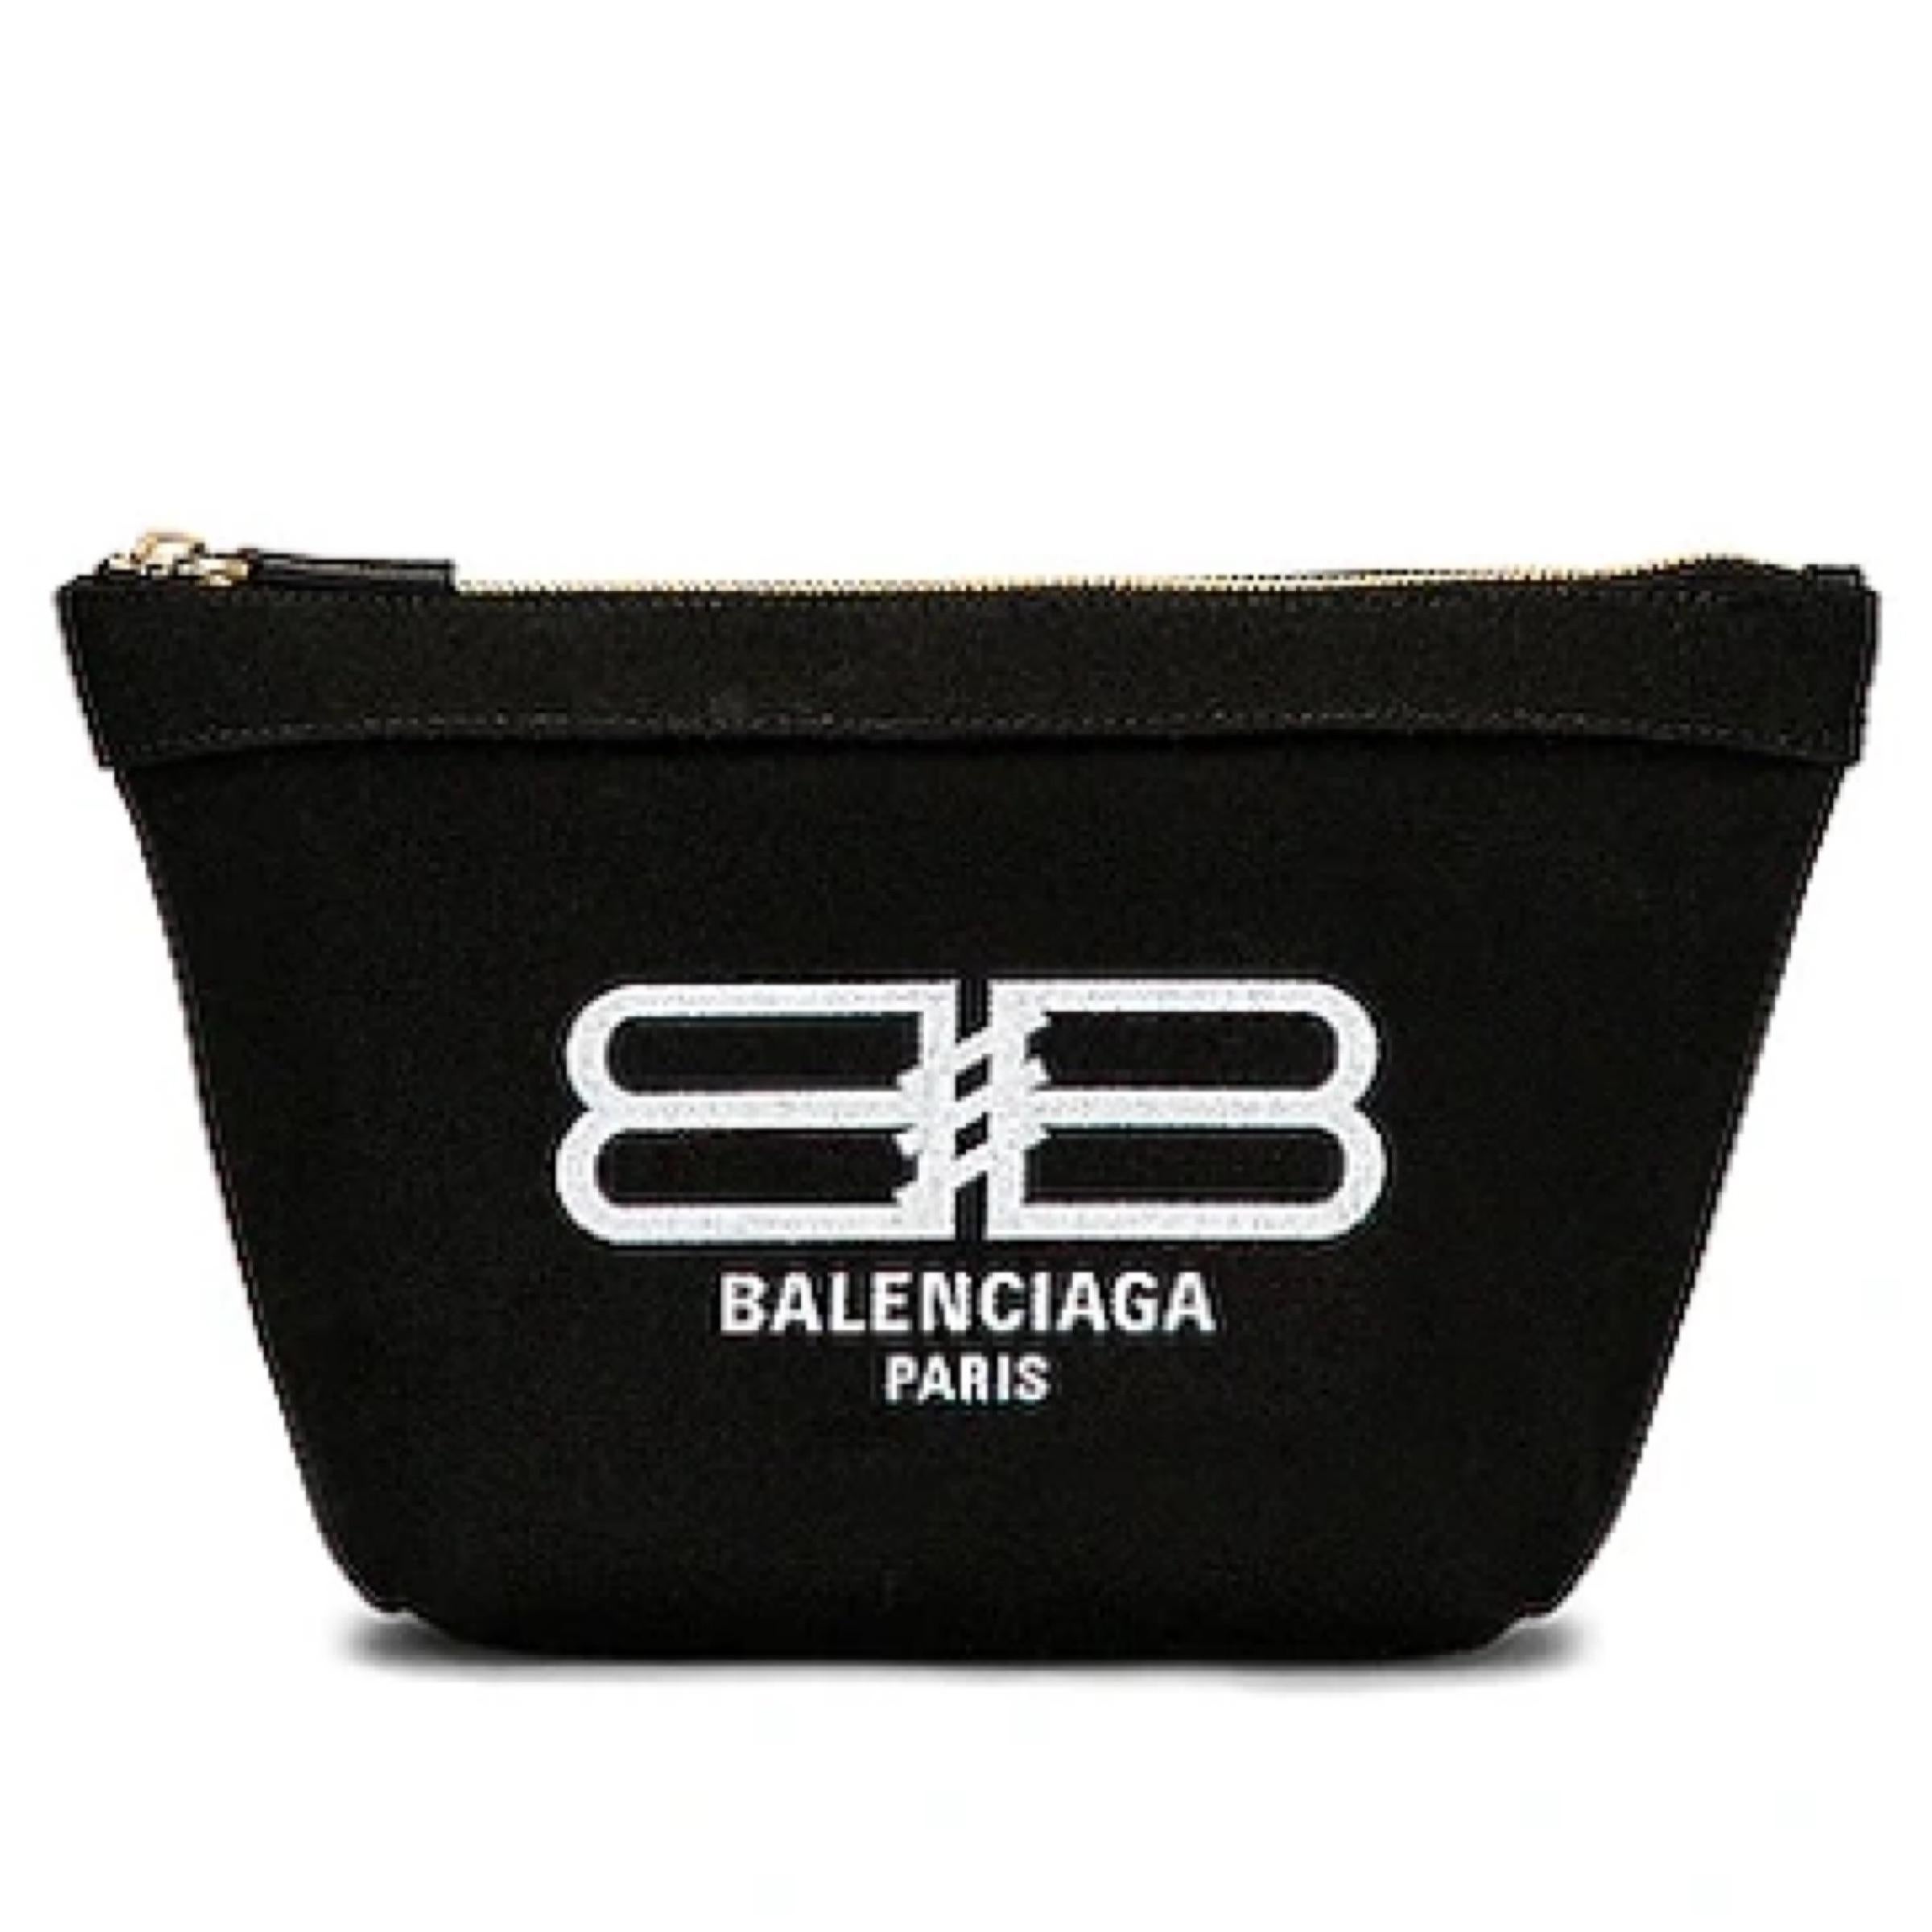 New Balenciaga Black BB Logo Print Small Jumbo Canvas Clutch Pouch Bag

Authenticity Guaranteed

DETAILS
Brand: Balenciaga
Condition: Brand new
Gender: Unisex
Category: Pouch
Color: Black
Material: Canvas
Front logo print
Gold-tone hardware
Top zip